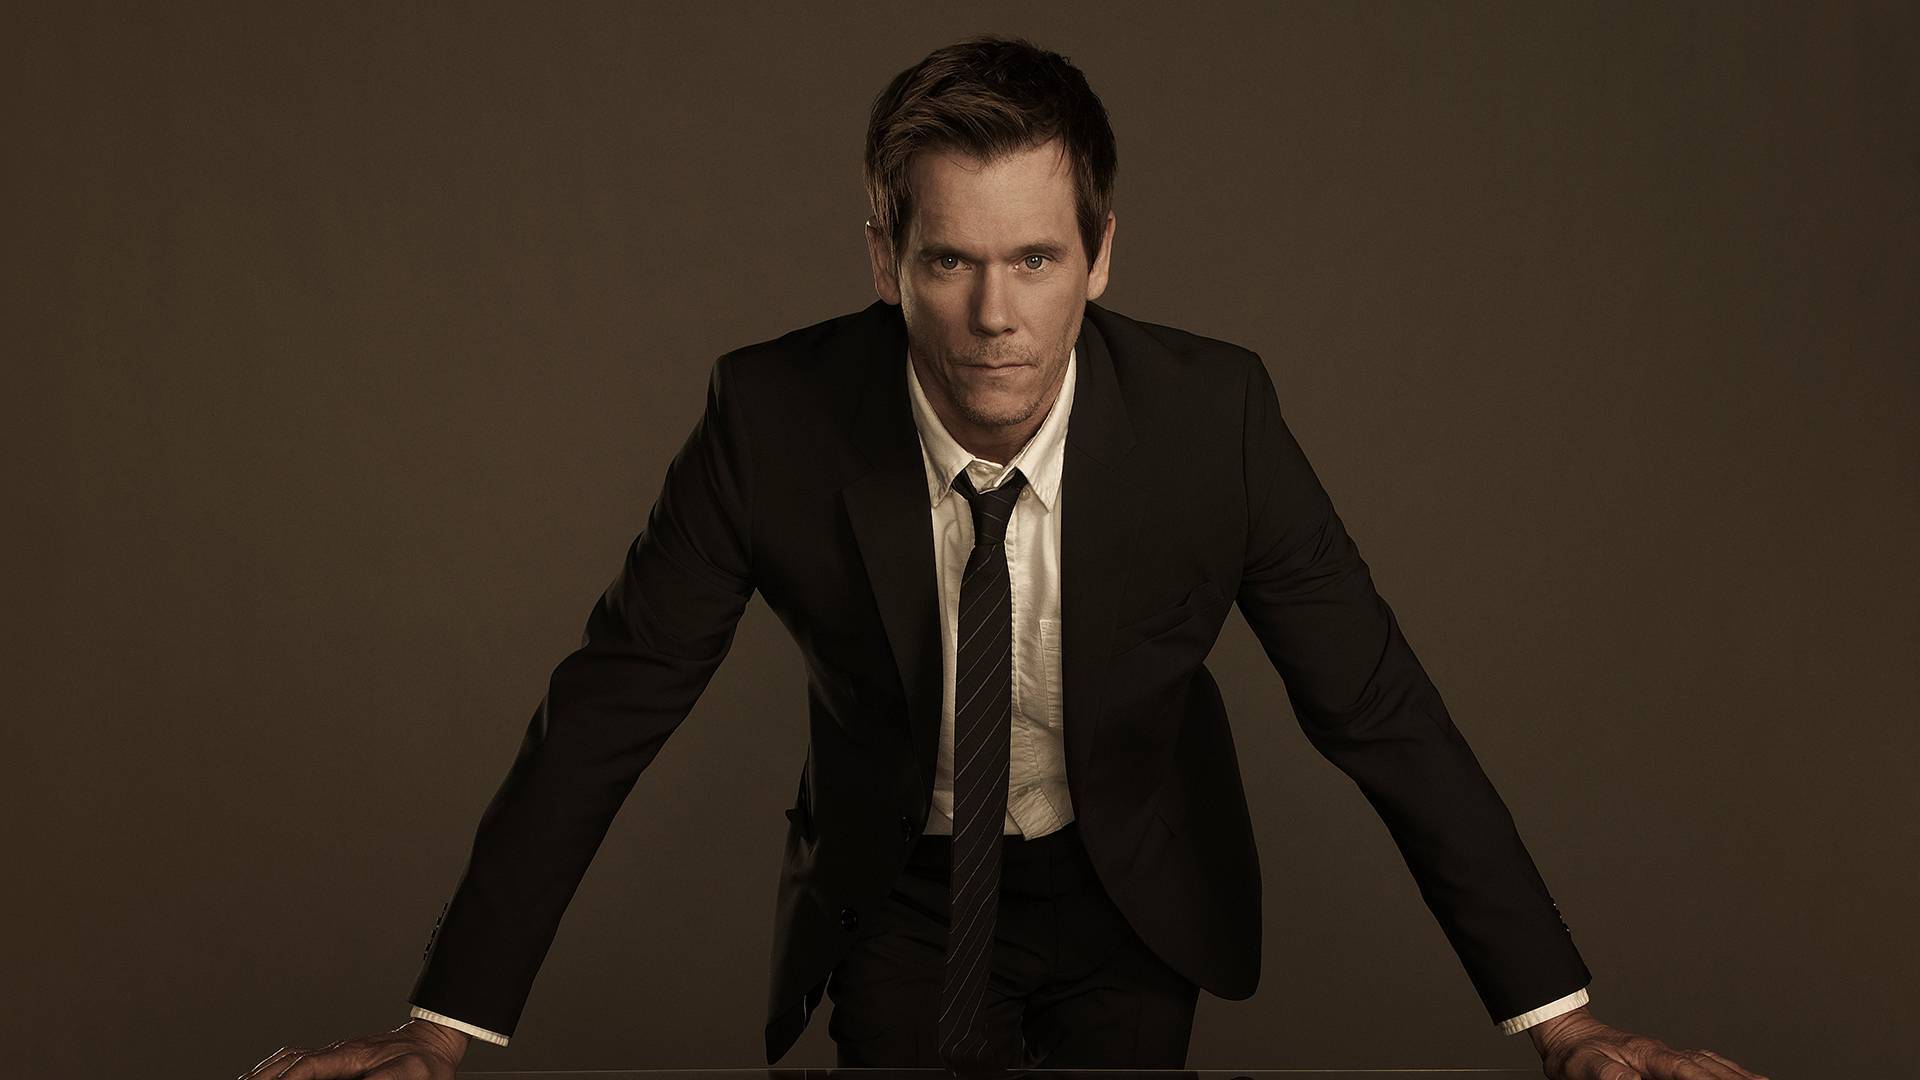 Kevin Bacon Wallpaper Image Photo Picture Background